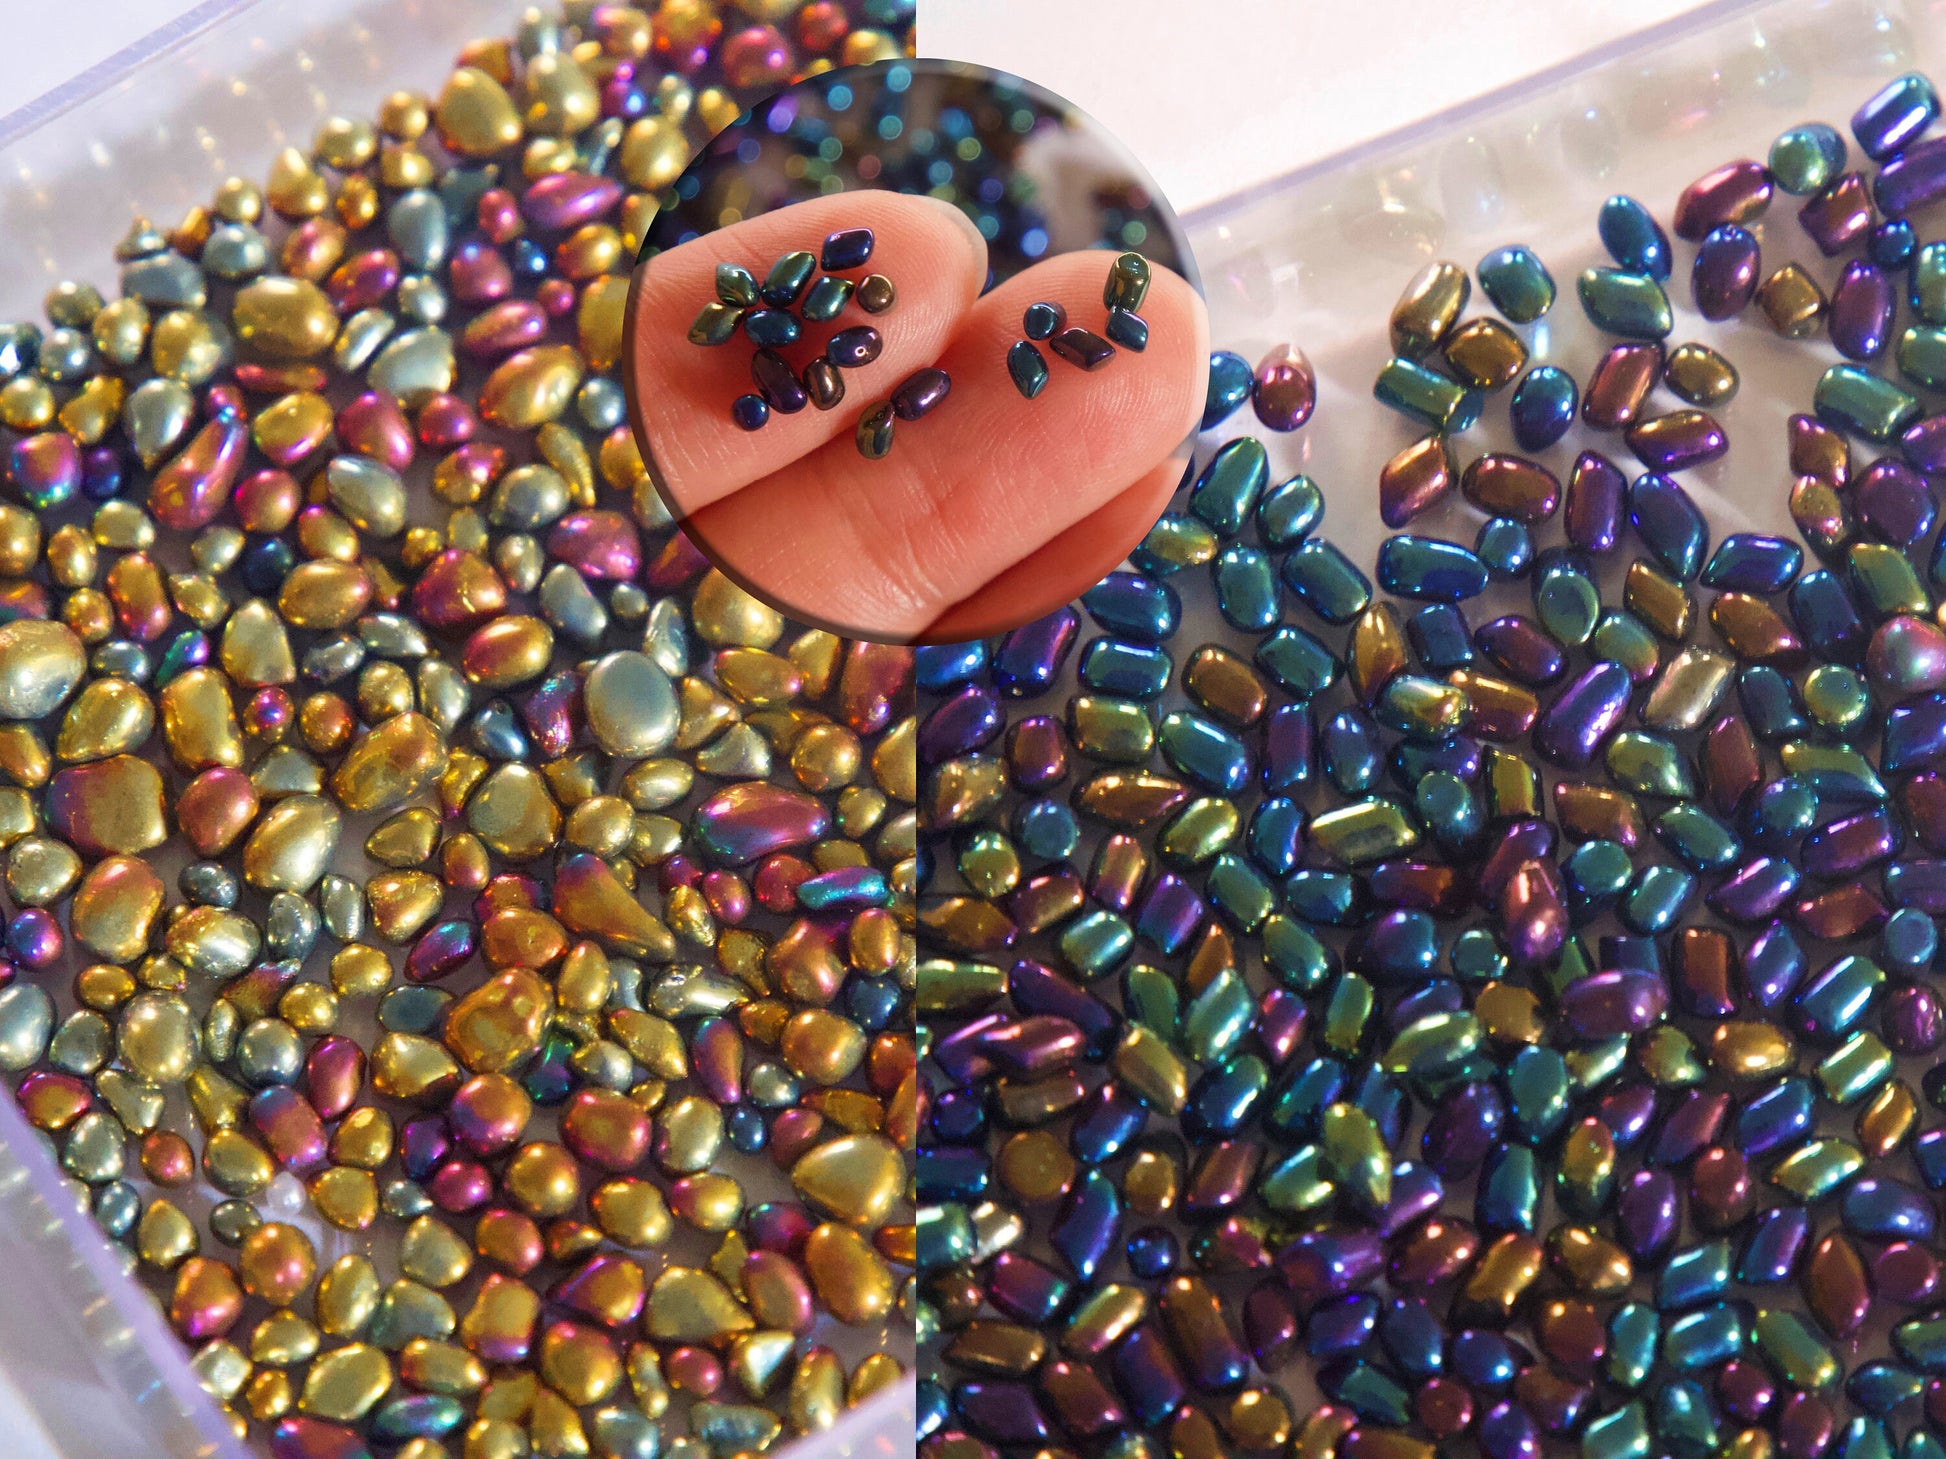 10g Irregular Electroplated Paint Chameleon Stones/ Holographic Rainbow Iridescent Beads/ Colorful Bubble rocks/ Nail art & Crafts Deco